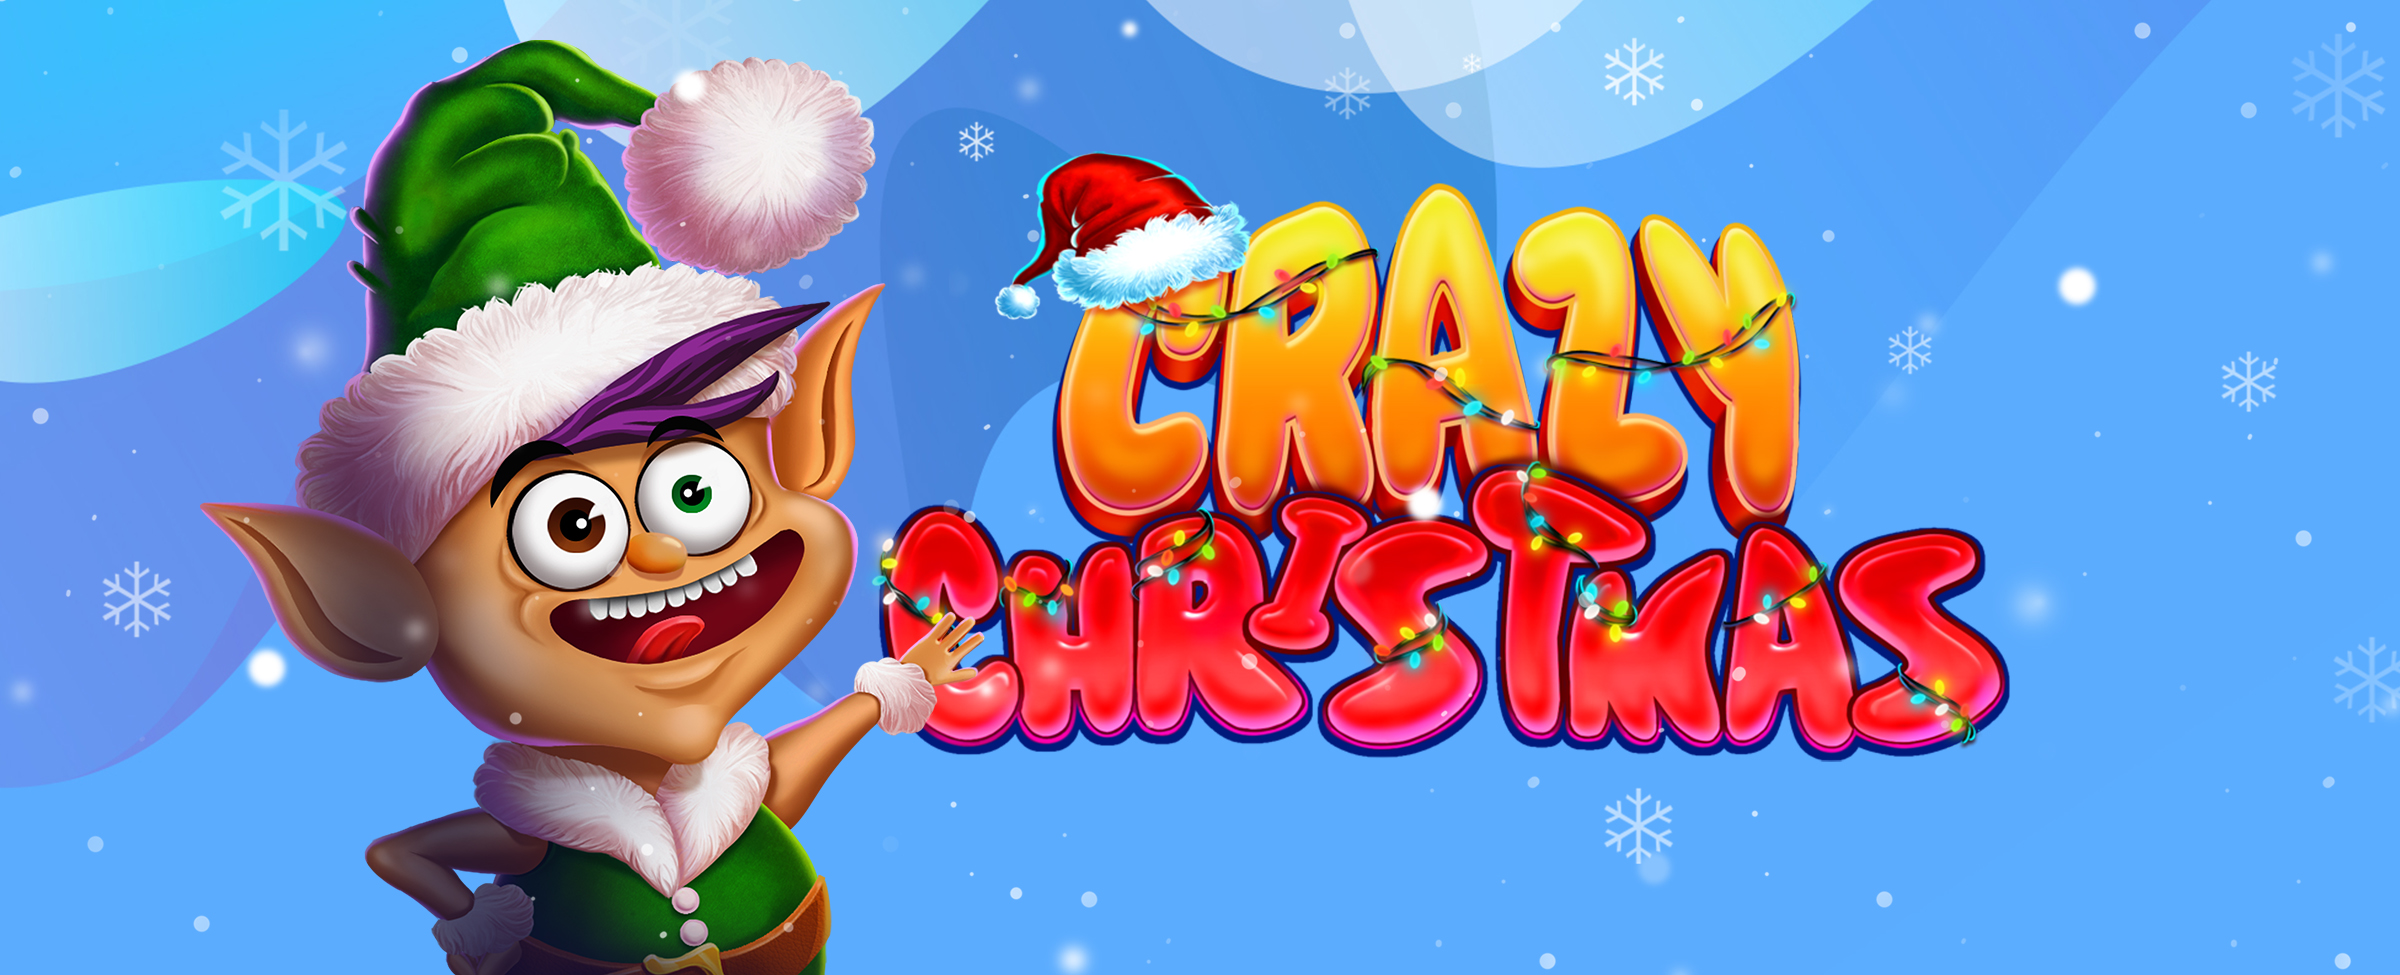 A funny looking 3D cartoon character of an elf with bulging eyes and oversized ears stands beside the words “Crazy Christmas”, which is the SlotsLV slot game logo.